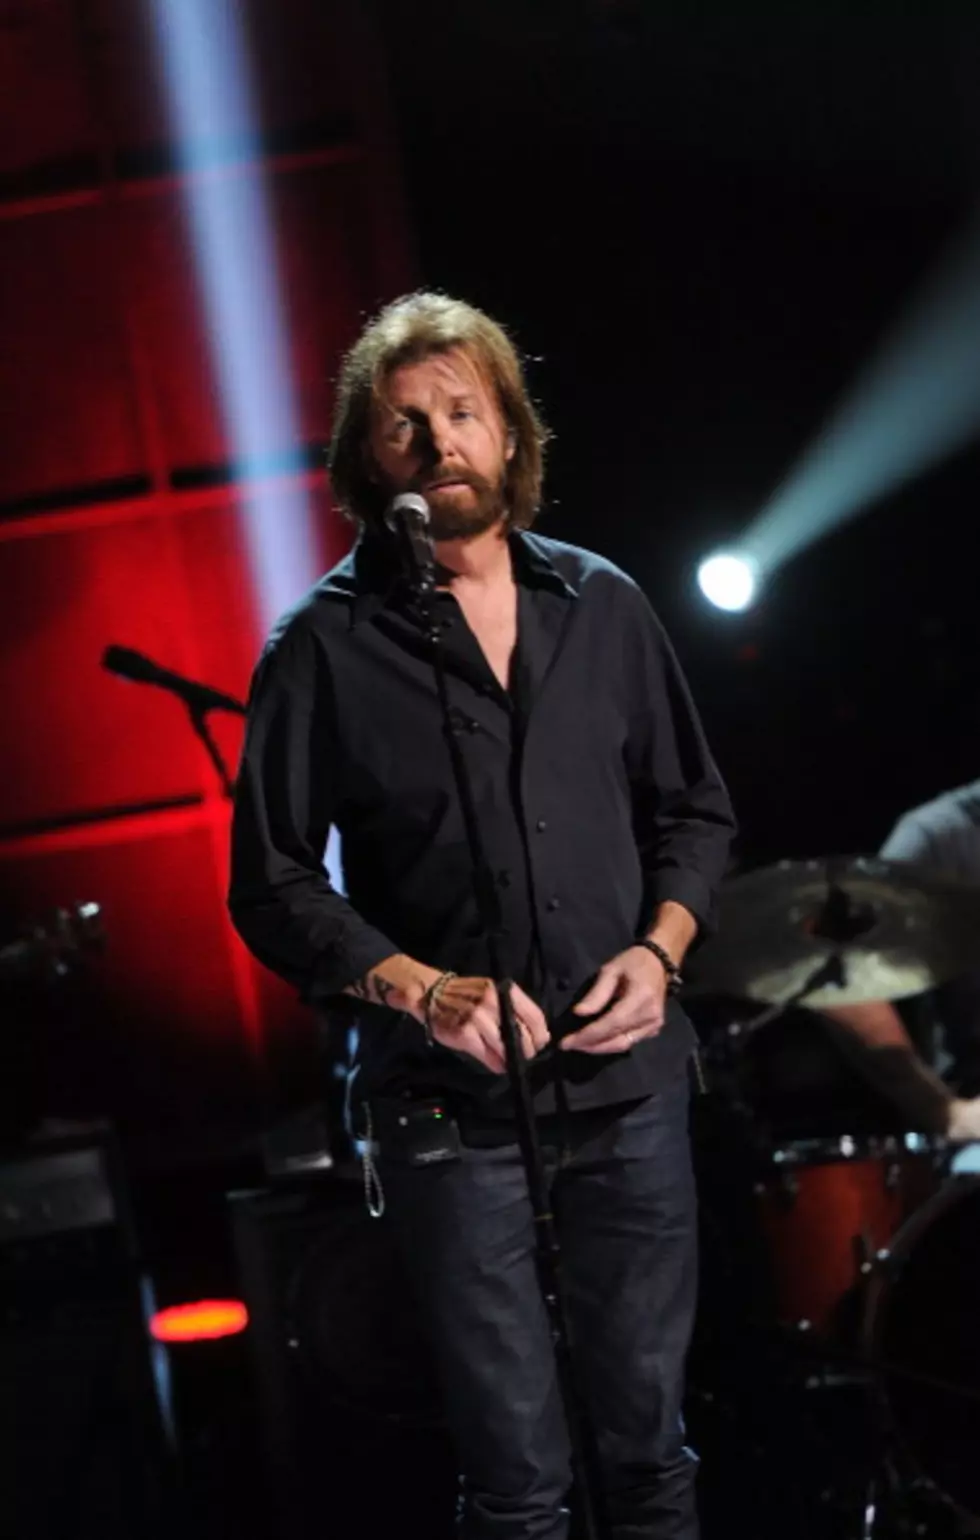 Ronnie Dunn And The Eli Young Band Featured On Today’s Daily Duel [AUDIO]